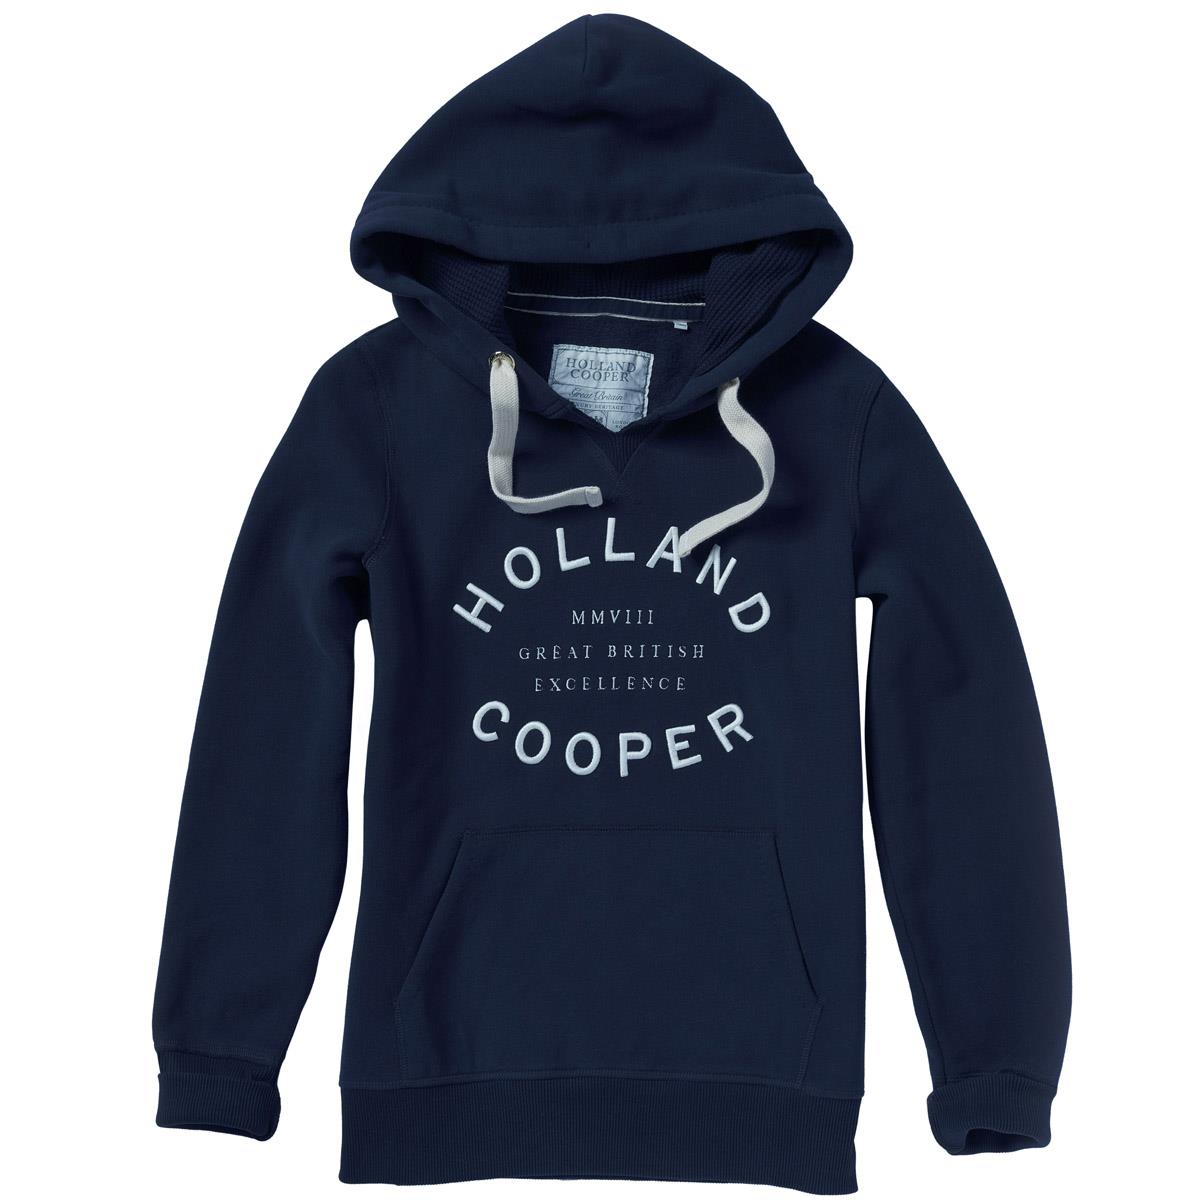 Holland Cooper Womens Varsity Hoodie Questions & Answers